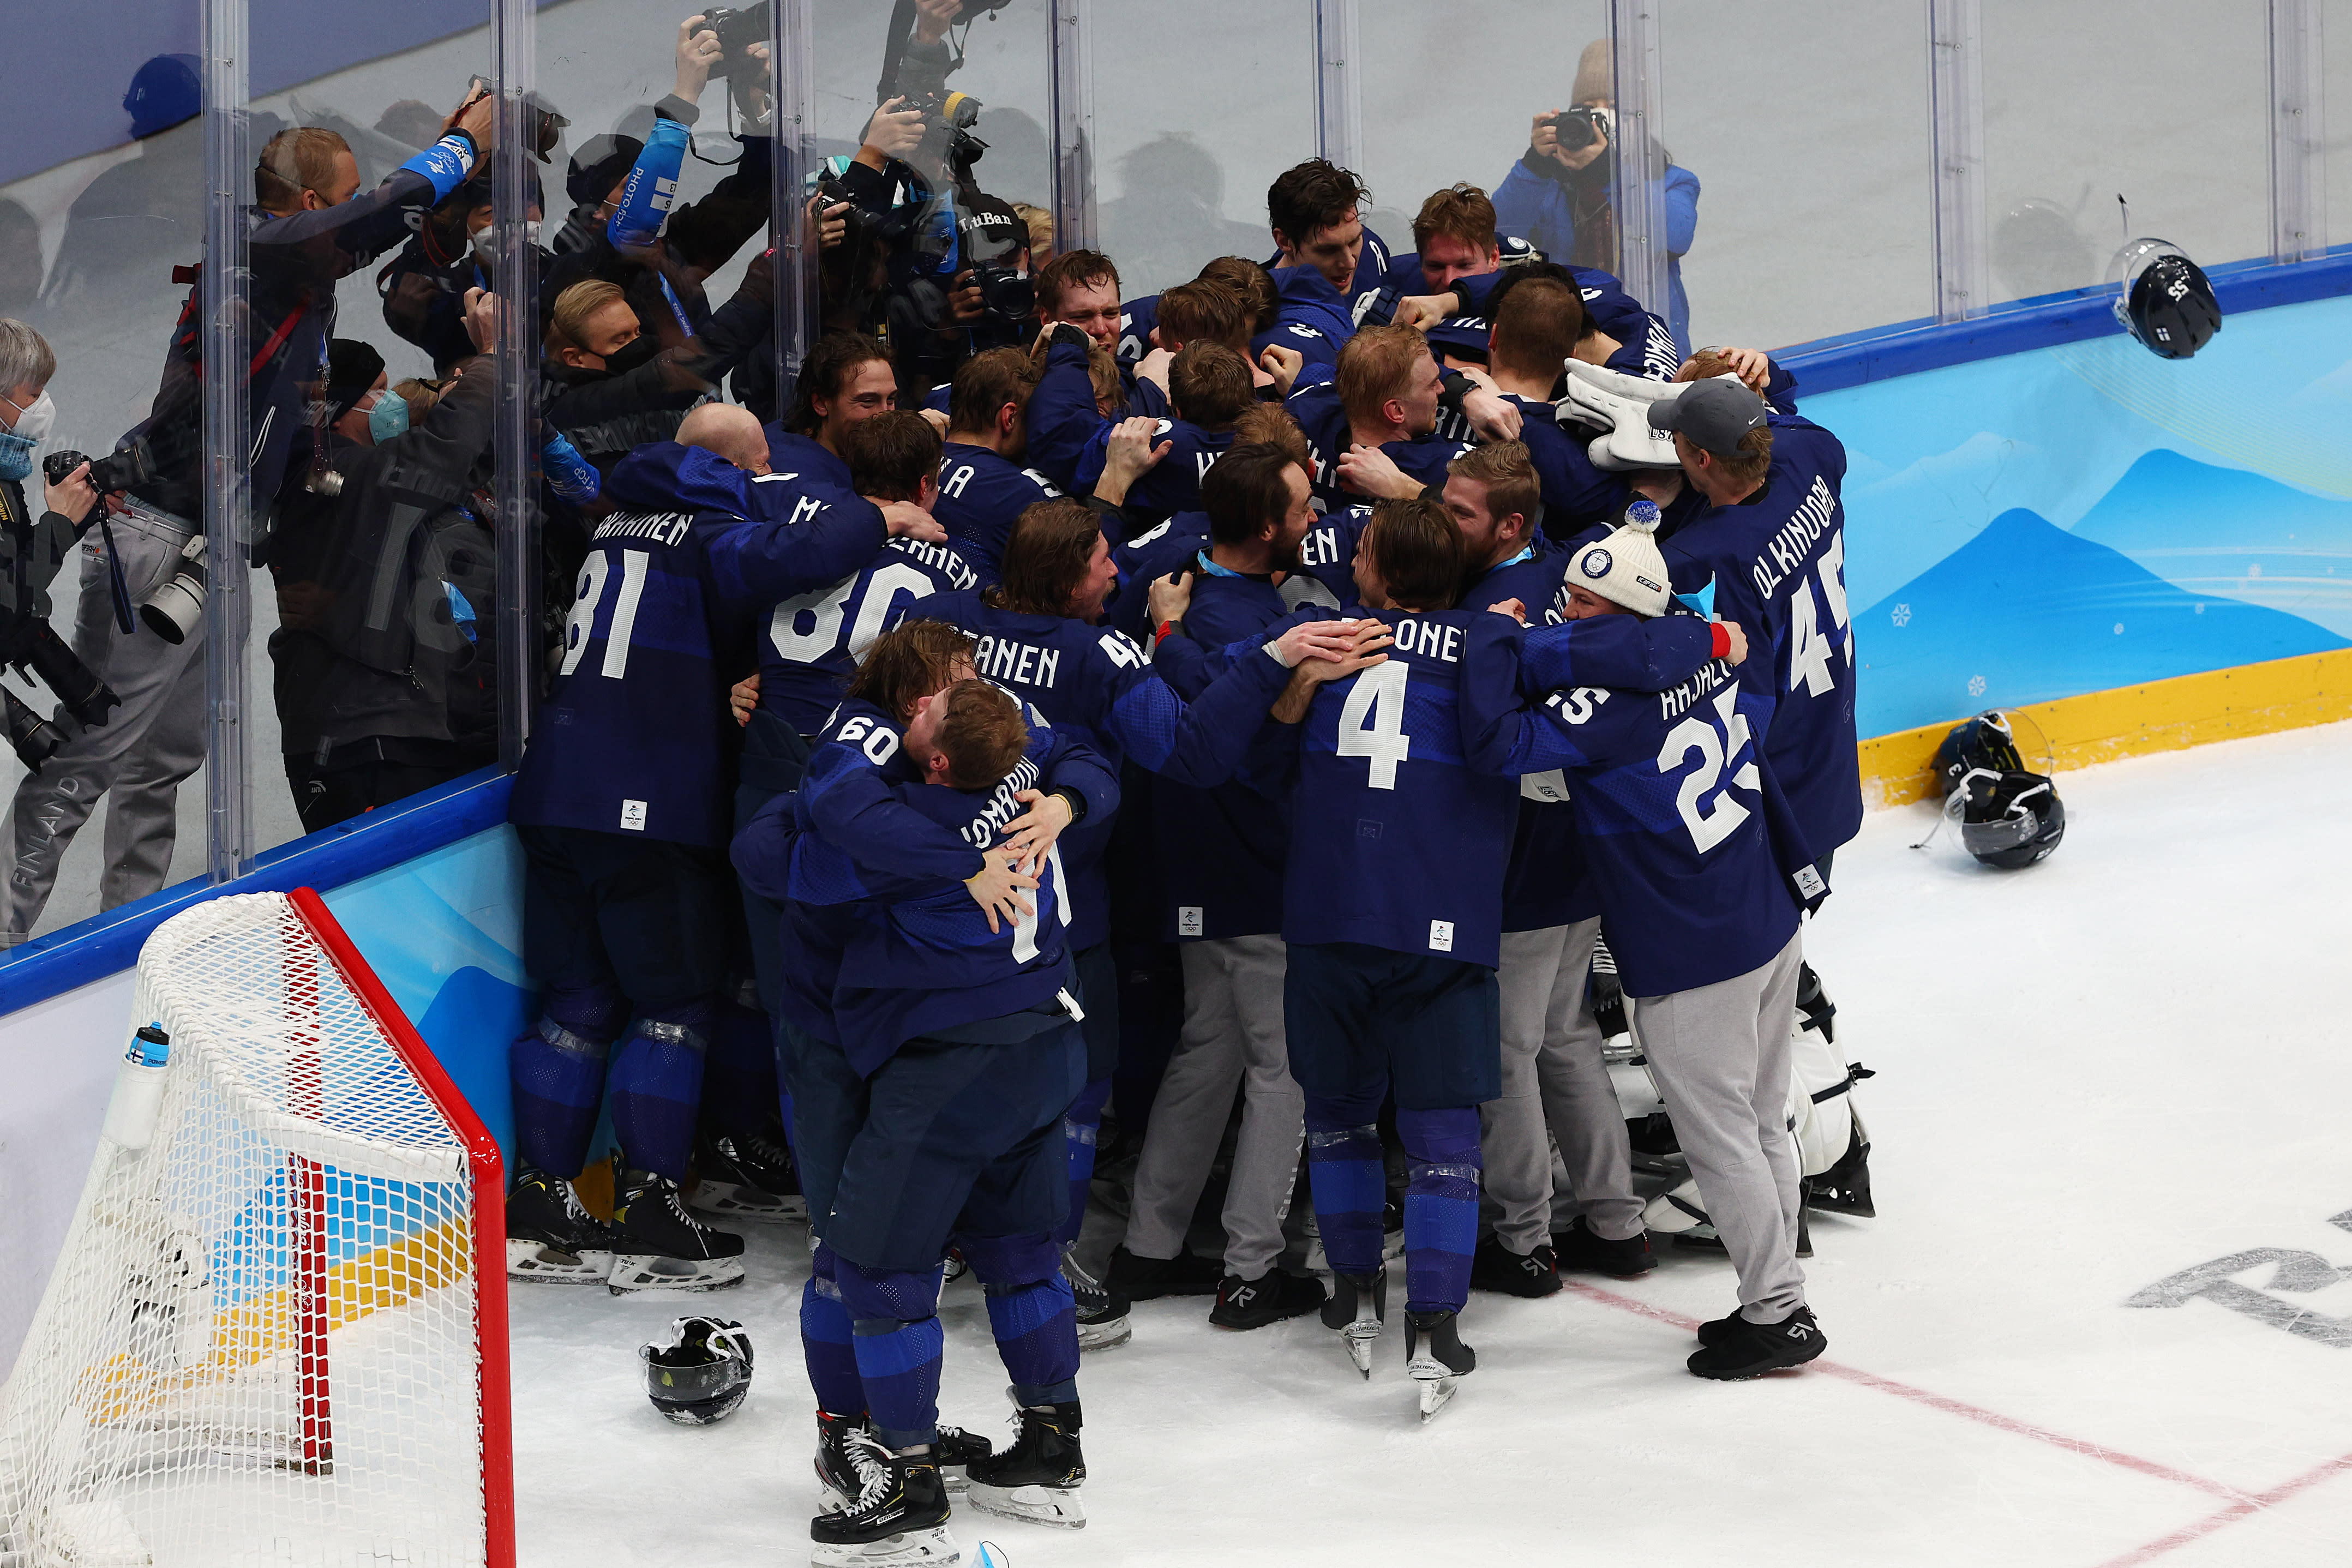 Finland won the first ever hockey gold medal at the Beijing Olympics